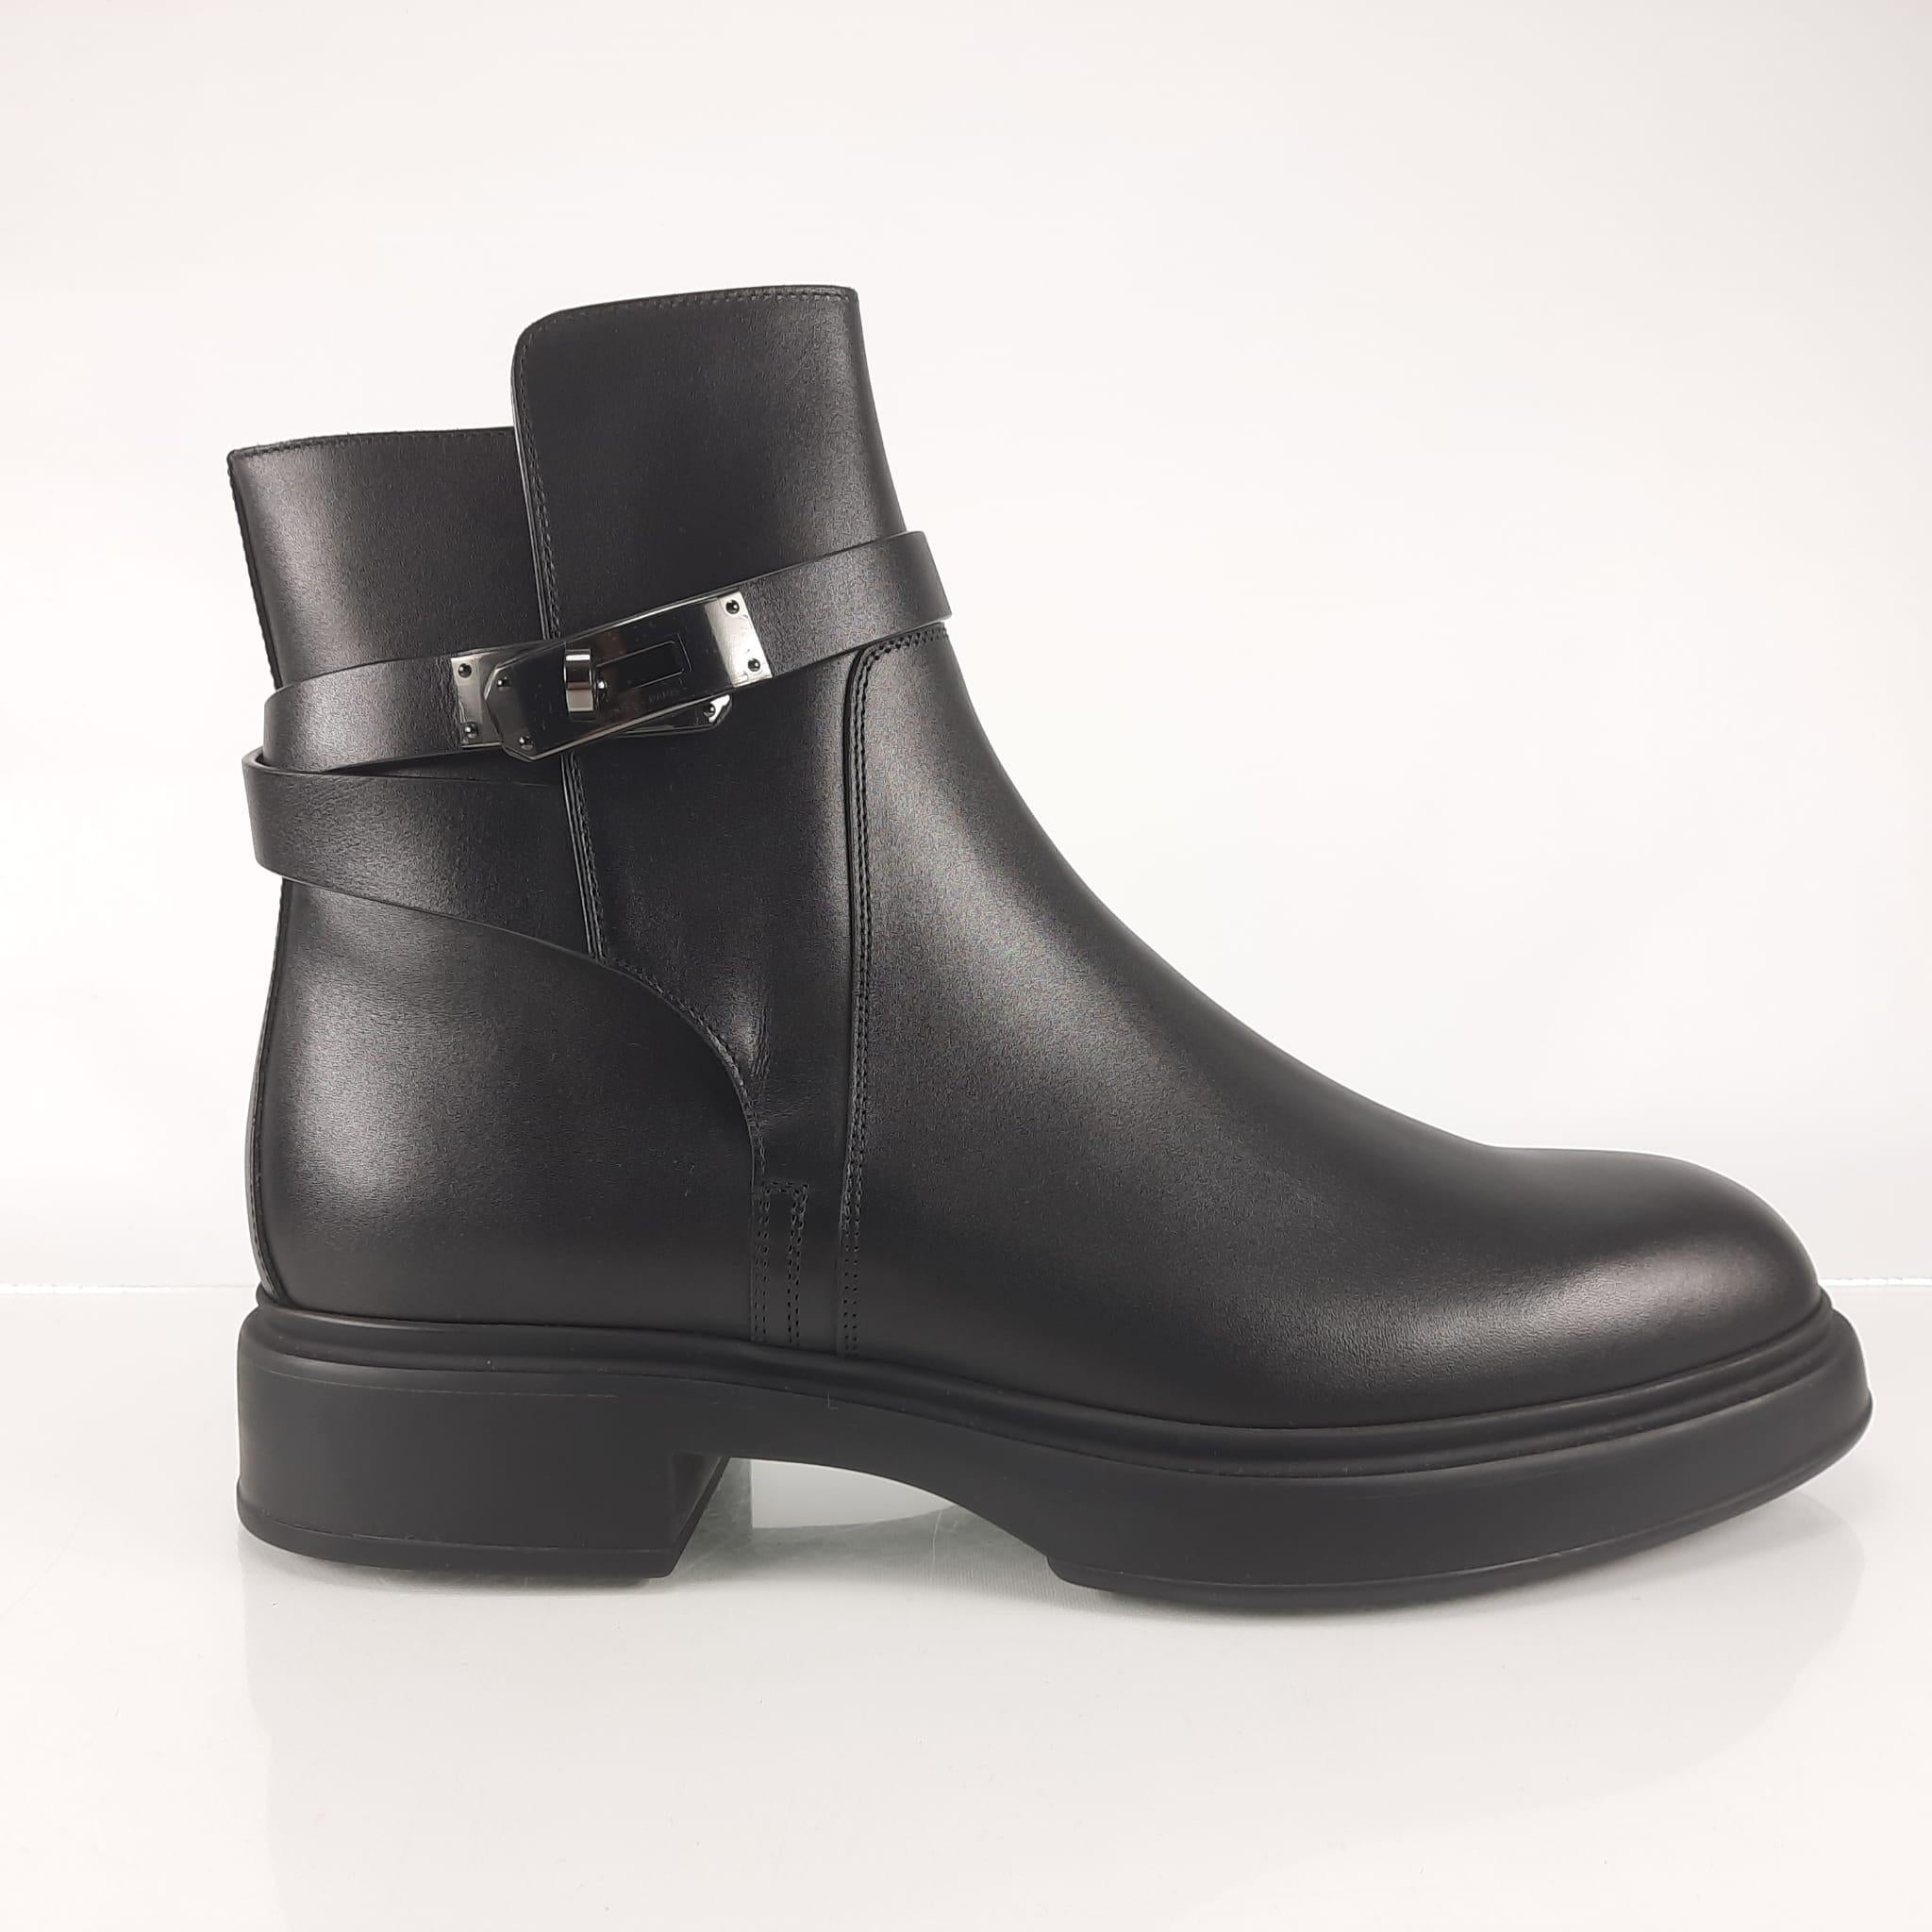 Size 42
Ankle boot in calfskin with functional shiny black PVD-plated Kelly buckle and rubber sole.
A comfortable modern look.
Made in Italy
Black rubber sole
Shiny black PVD-plated buckle
Black calfskin insole and lining